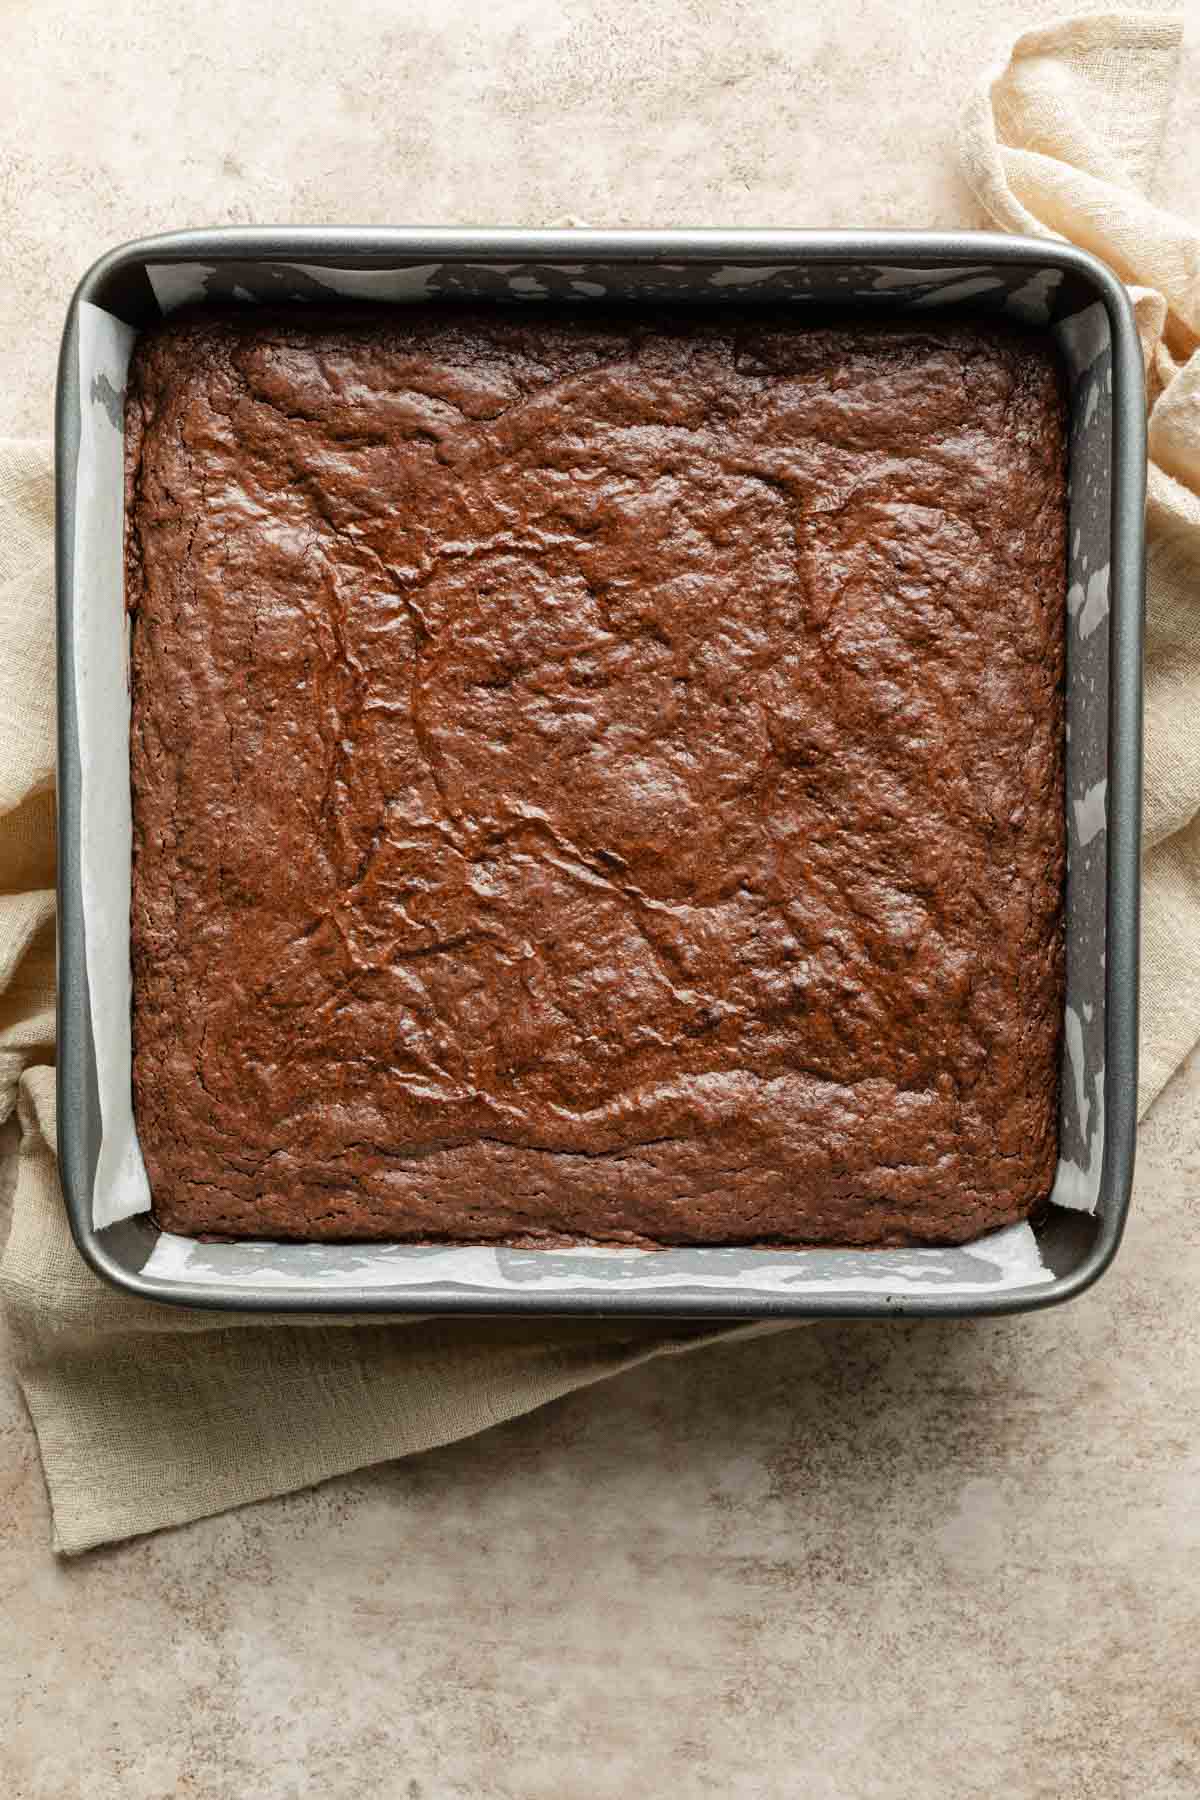 Brownies baked up in a square pan and resting on a beige cloth.